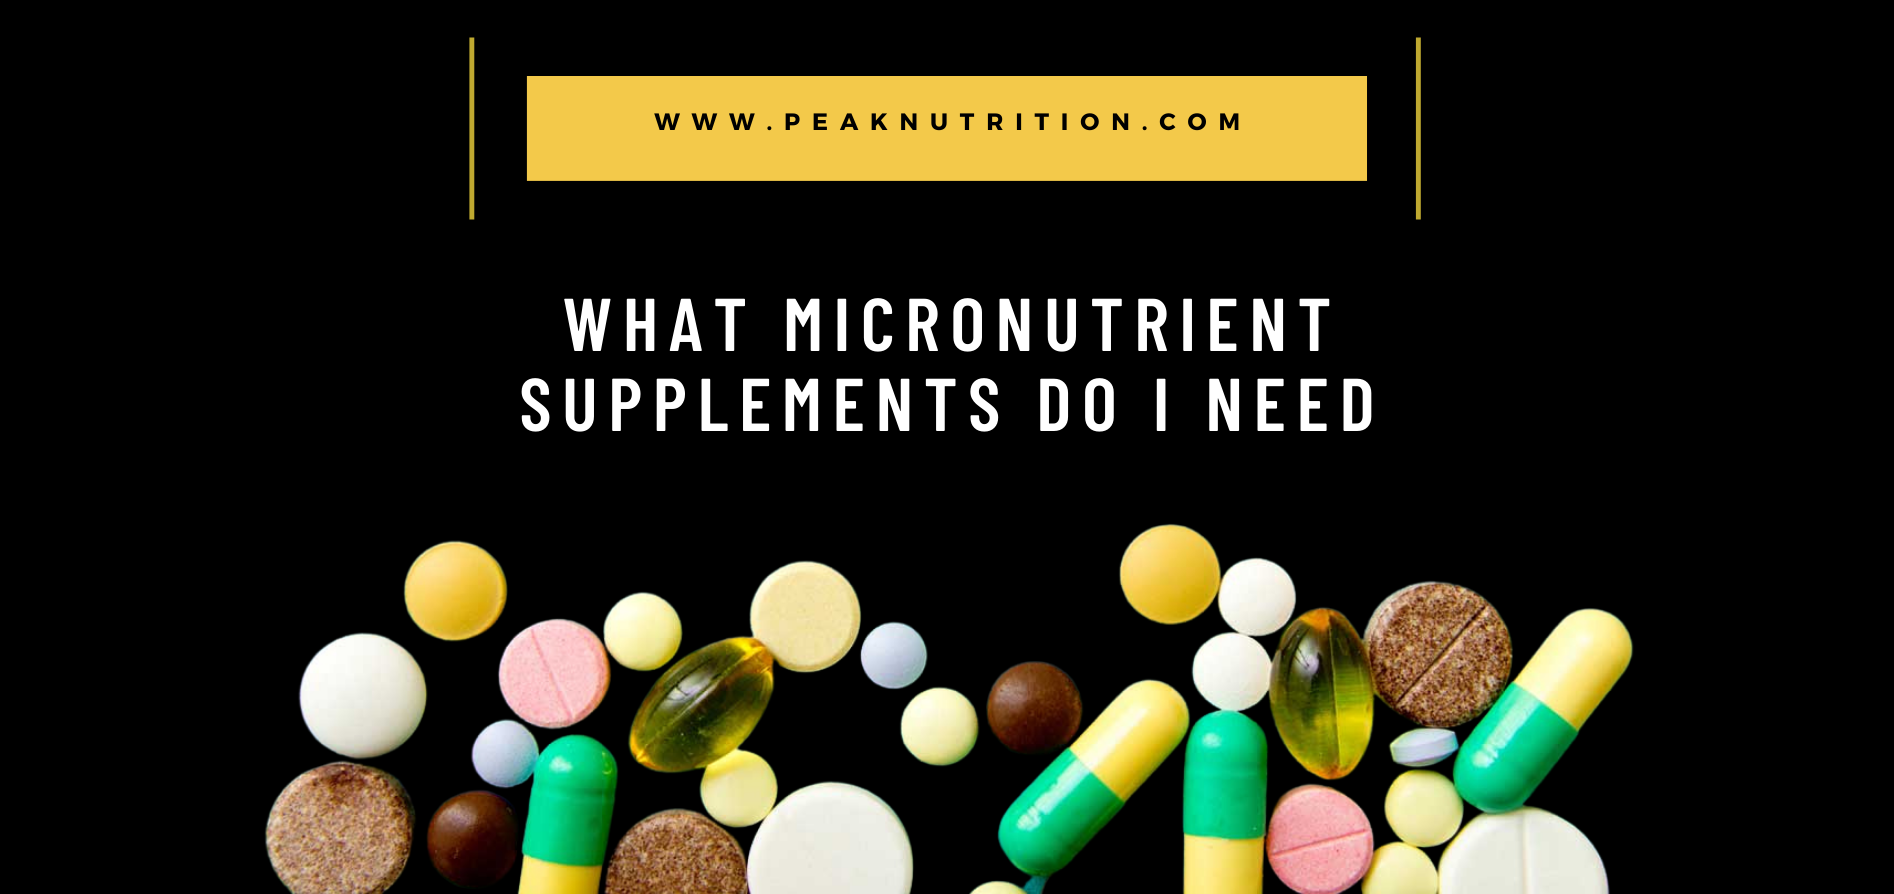 Choosing the correct micronutrient supplements